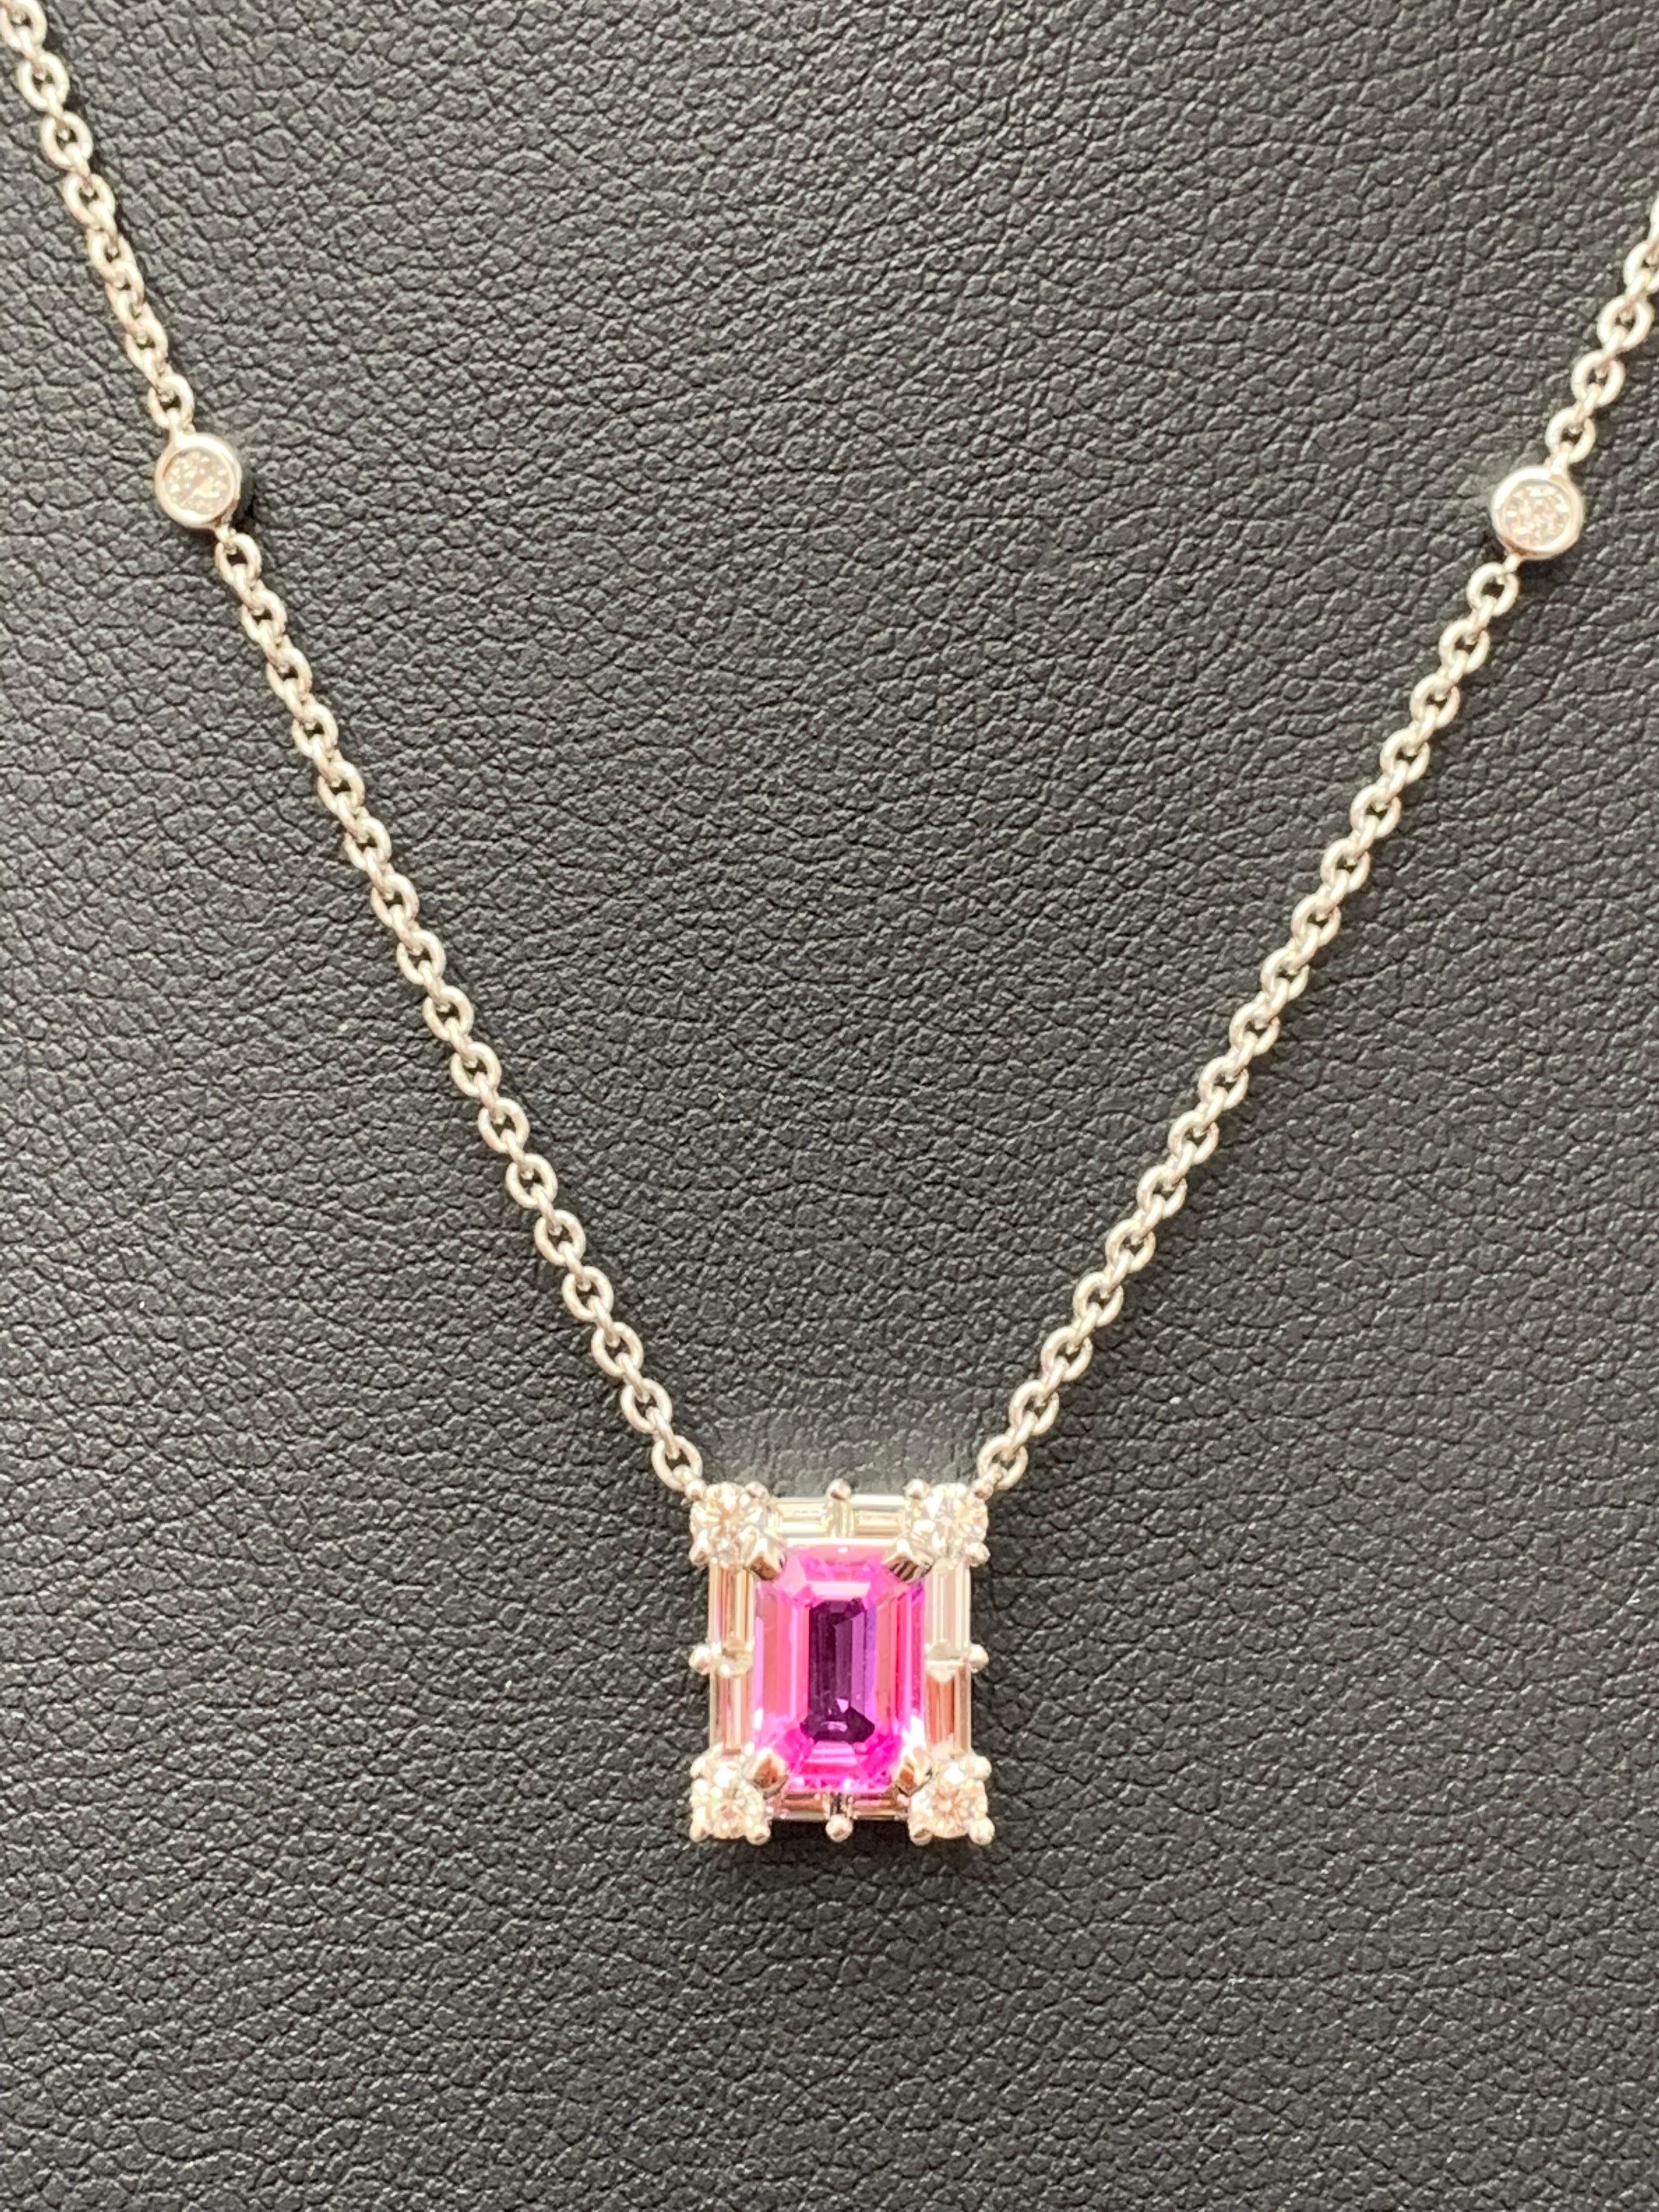 A fashionable pendant necklace showcasing a 0.96-carat emerald cut vibrant pink color Sapphire. The center stone is surrounded by a row of brilliant-cut 8 round and 8 baguette diamonds weighing 0.58 carats total. Made in 18k white gold. Comes with a